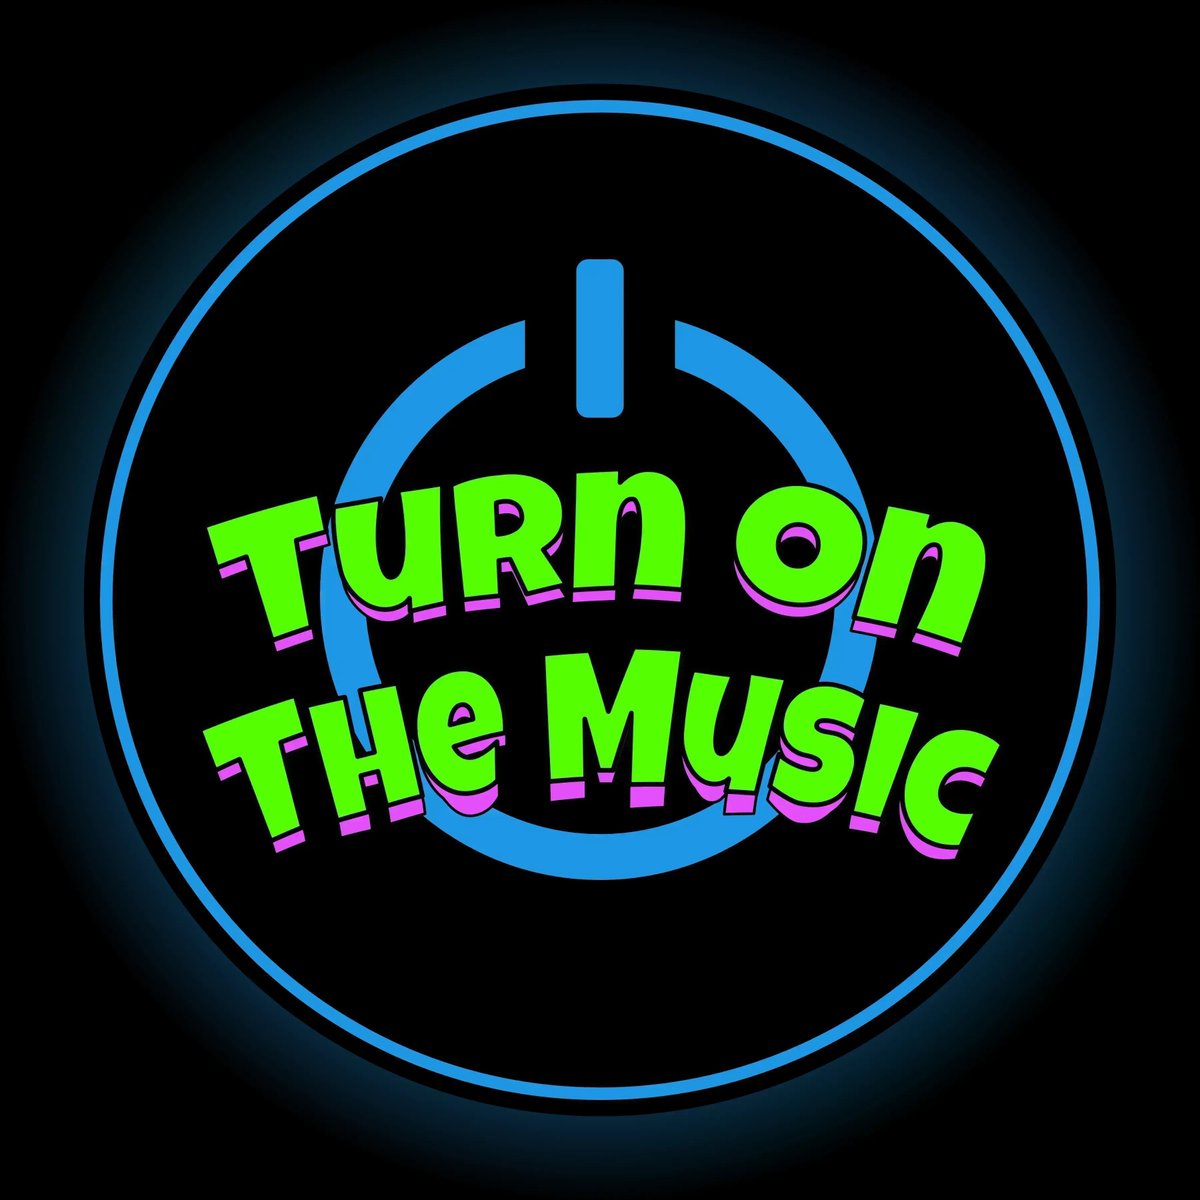 TONIGHT! LIVE on Twitch @ 7:30 pm EST - It's us again! We just wanted to poke you, and remind you to join Kyle & CJ later this evening. If you are bored go check out our YouTube channel. #sharethemusic #music #conversations #turnonthemusic #podcast #twitch buff.ly/3XdYTxH